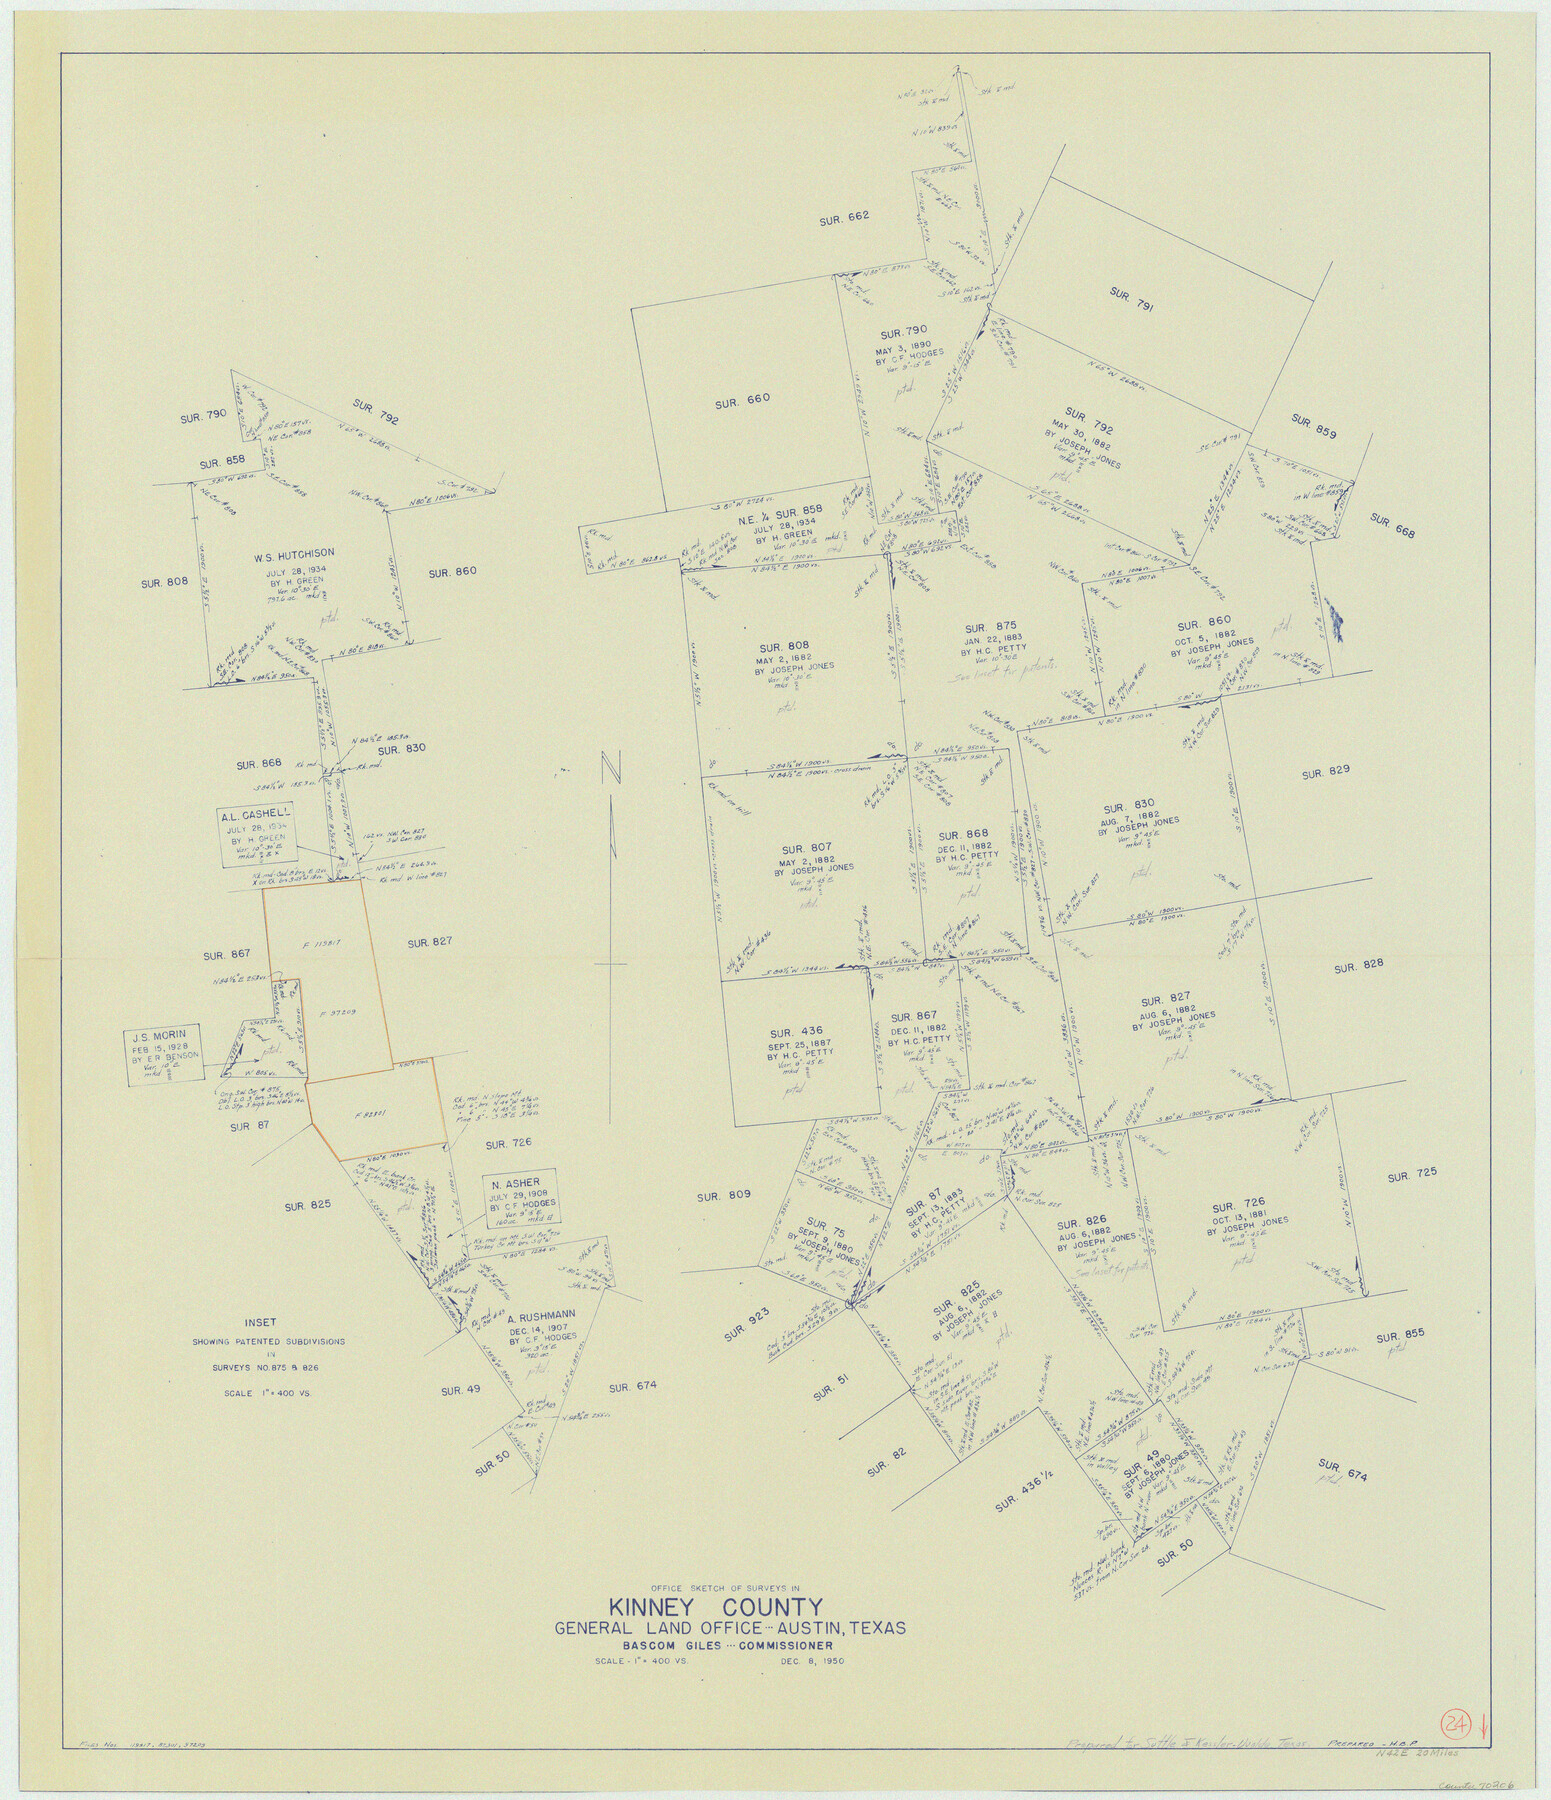 70206, Kinney County Working Sketch 24, General Map Collection